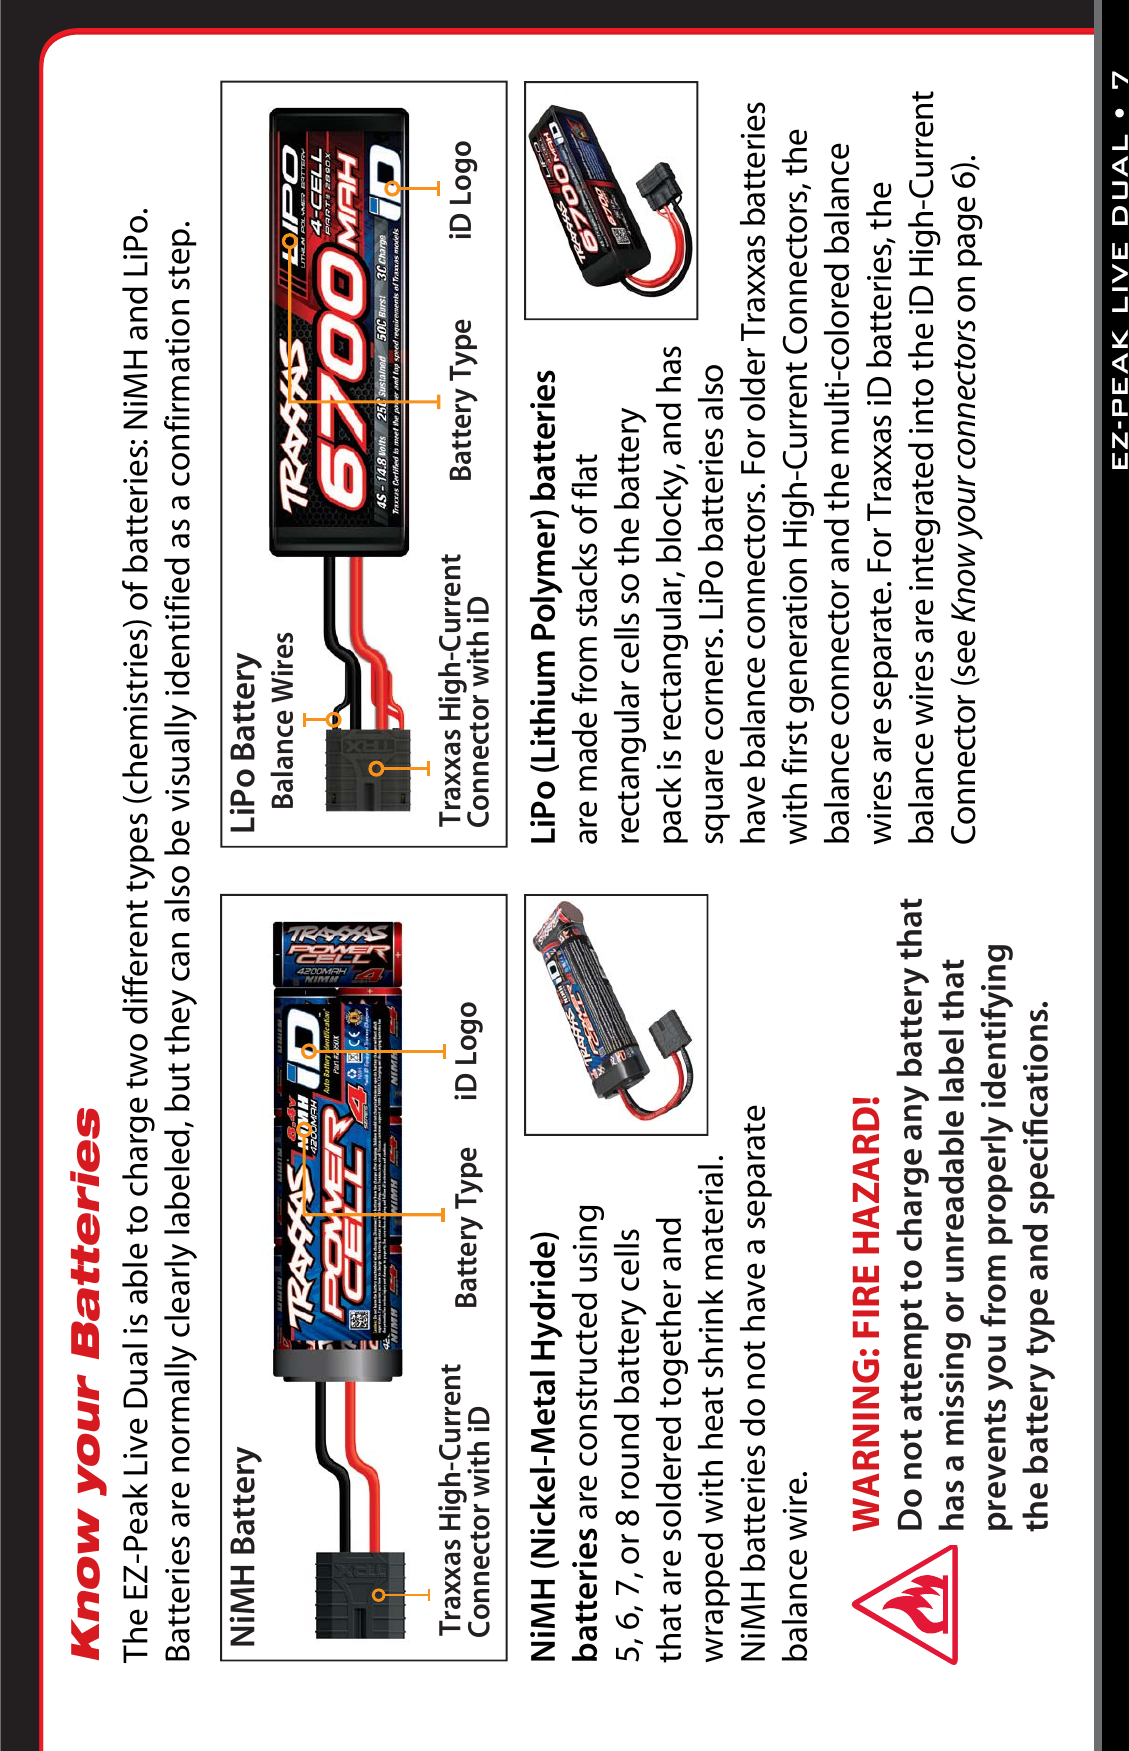 EZ-PEAK LIVE DUAL •7LiPo (Lithium Polymer) batteries are made from stacks of flat rectangular cells so the battery pack is rectangular, blocky, and has square corners. LiPo batteries also have balance connectors. For older Traxxas batteries with first generation High-Current Connectors, the balance connector and the multi-colored balance wires are separate. For Traxxas iD batteries, the balance wires are integrated into the iD High-Current Connector (see Know your connectors on page 6).NiMH (Nickel-Metal Hydride) batteries are constructed using  5, 6, 7, or 8 round battery cells  that are soldered together and wrapped with heat shrink material. NiMH batteries do not have a separate  balance wire. Know your BatteriesThe EZ-Peak Live Dual is able to charge two different types (chemistries) of batteries: NiMH and LiPo.  Batteries are normally clearly labeled, but they can also be visually identified as a confirmation step.iD LogoBattery TypeTraxxas High-Current Connector with iDNiMH BatteryiD LogoBattery TypeTraxxas High-Current Connector with iDLiPo BatteryBalance WiresWARNING: FIRE HAZARD!  Do not attempt to charge any battery that has a missing or unreadable label that prevents you from properly identifying the battery type and speciﬁcations.